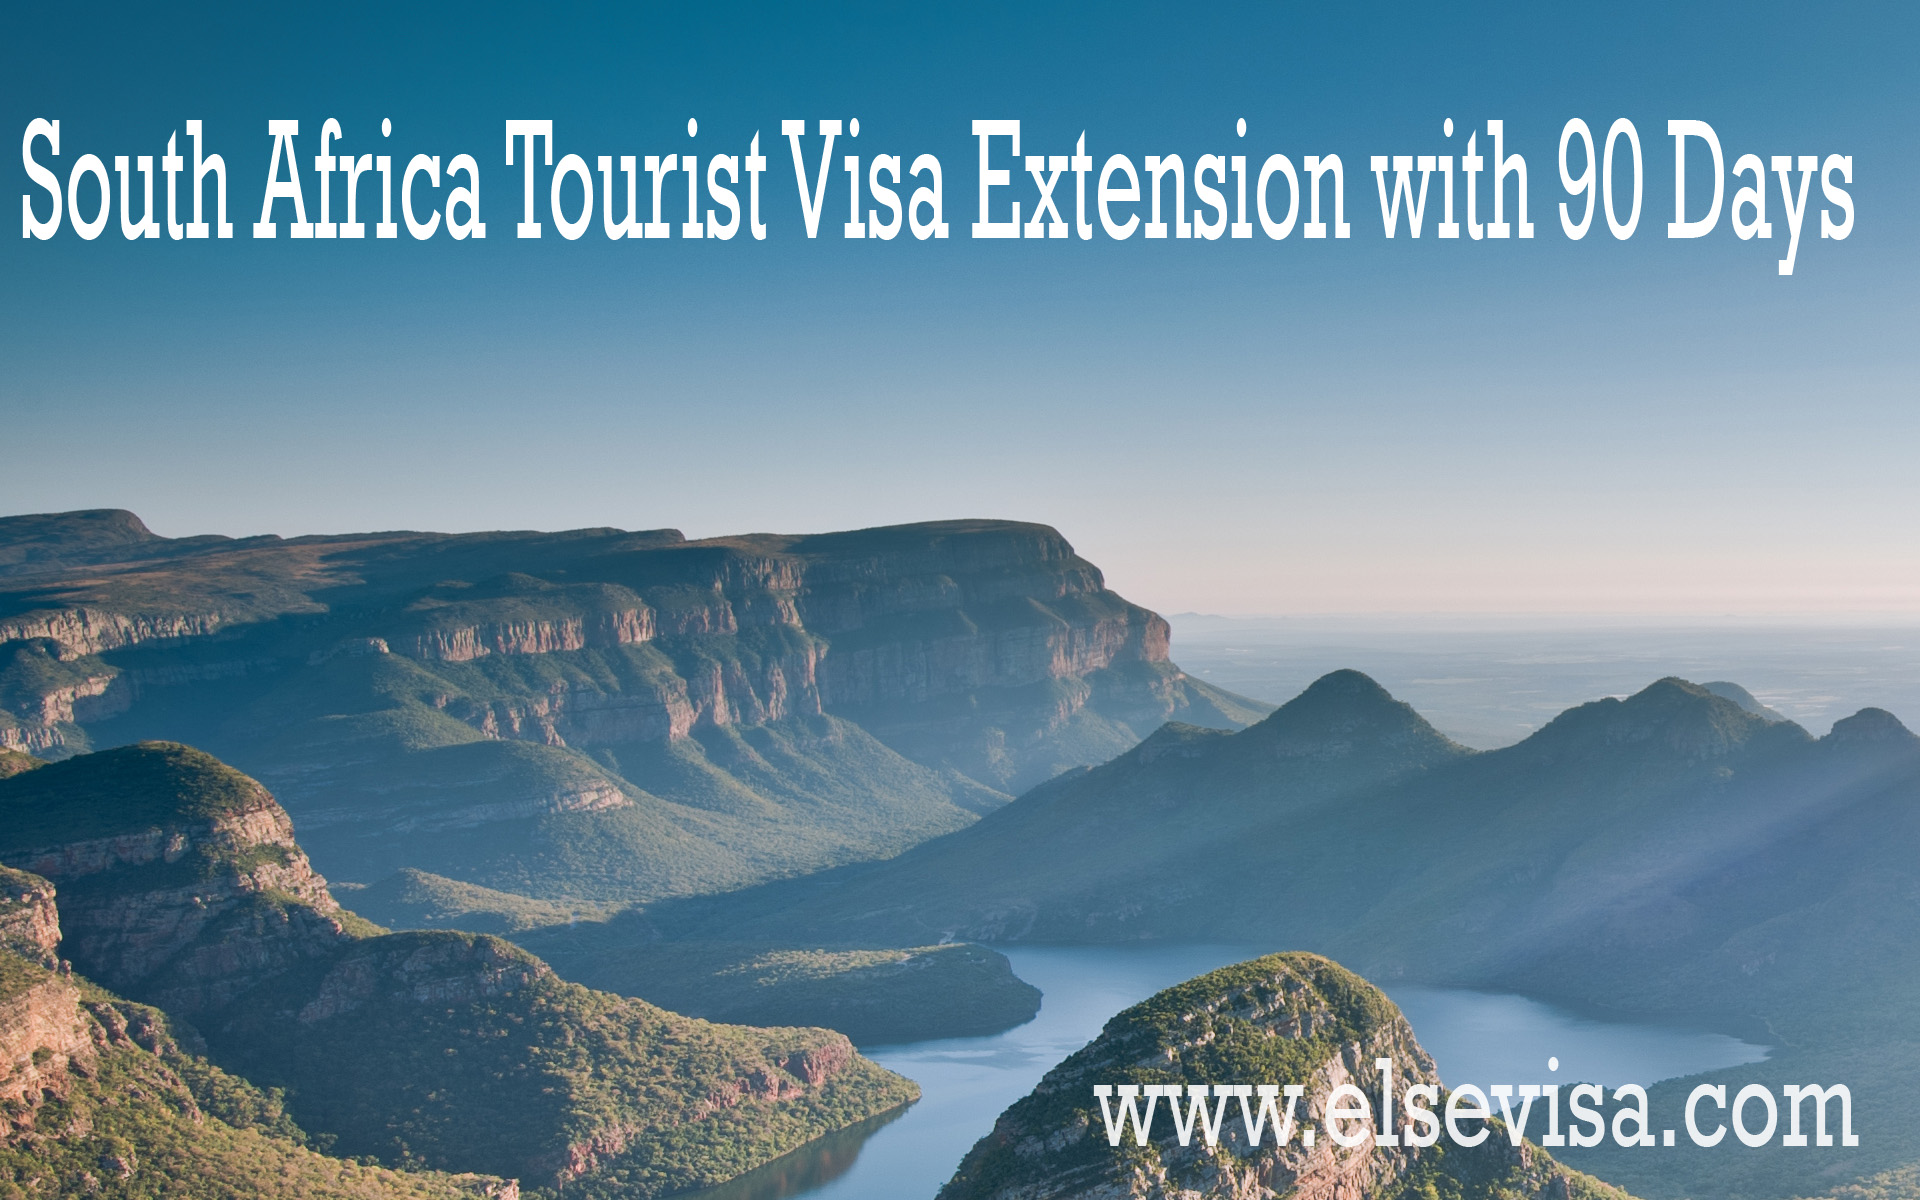 South Africa Tourist Visa Extension with 90 Days